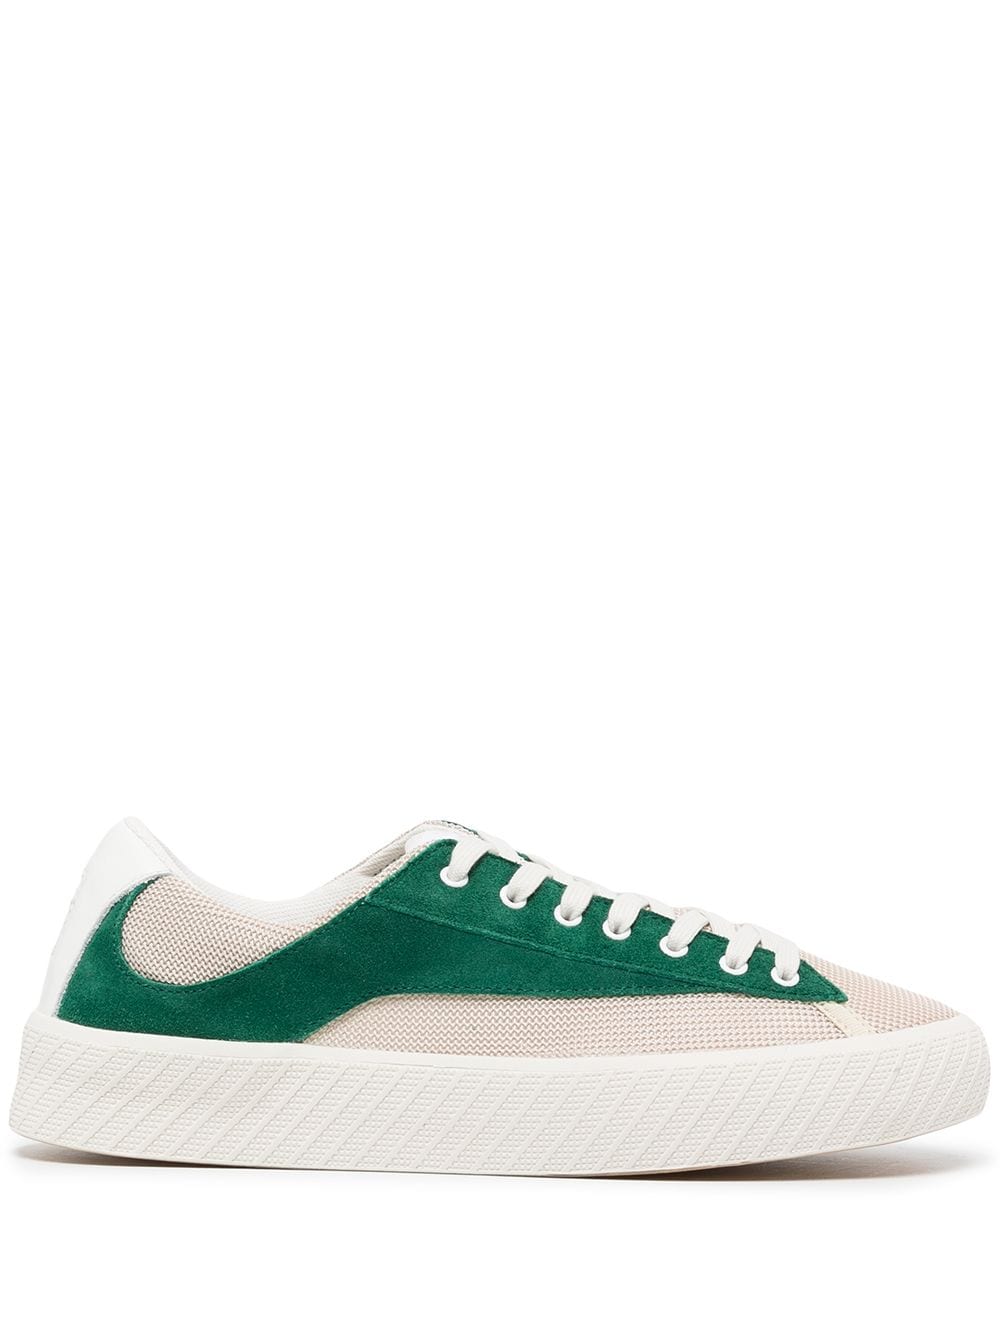 BY FAR suede-panel sneakers - Green von BY FAR